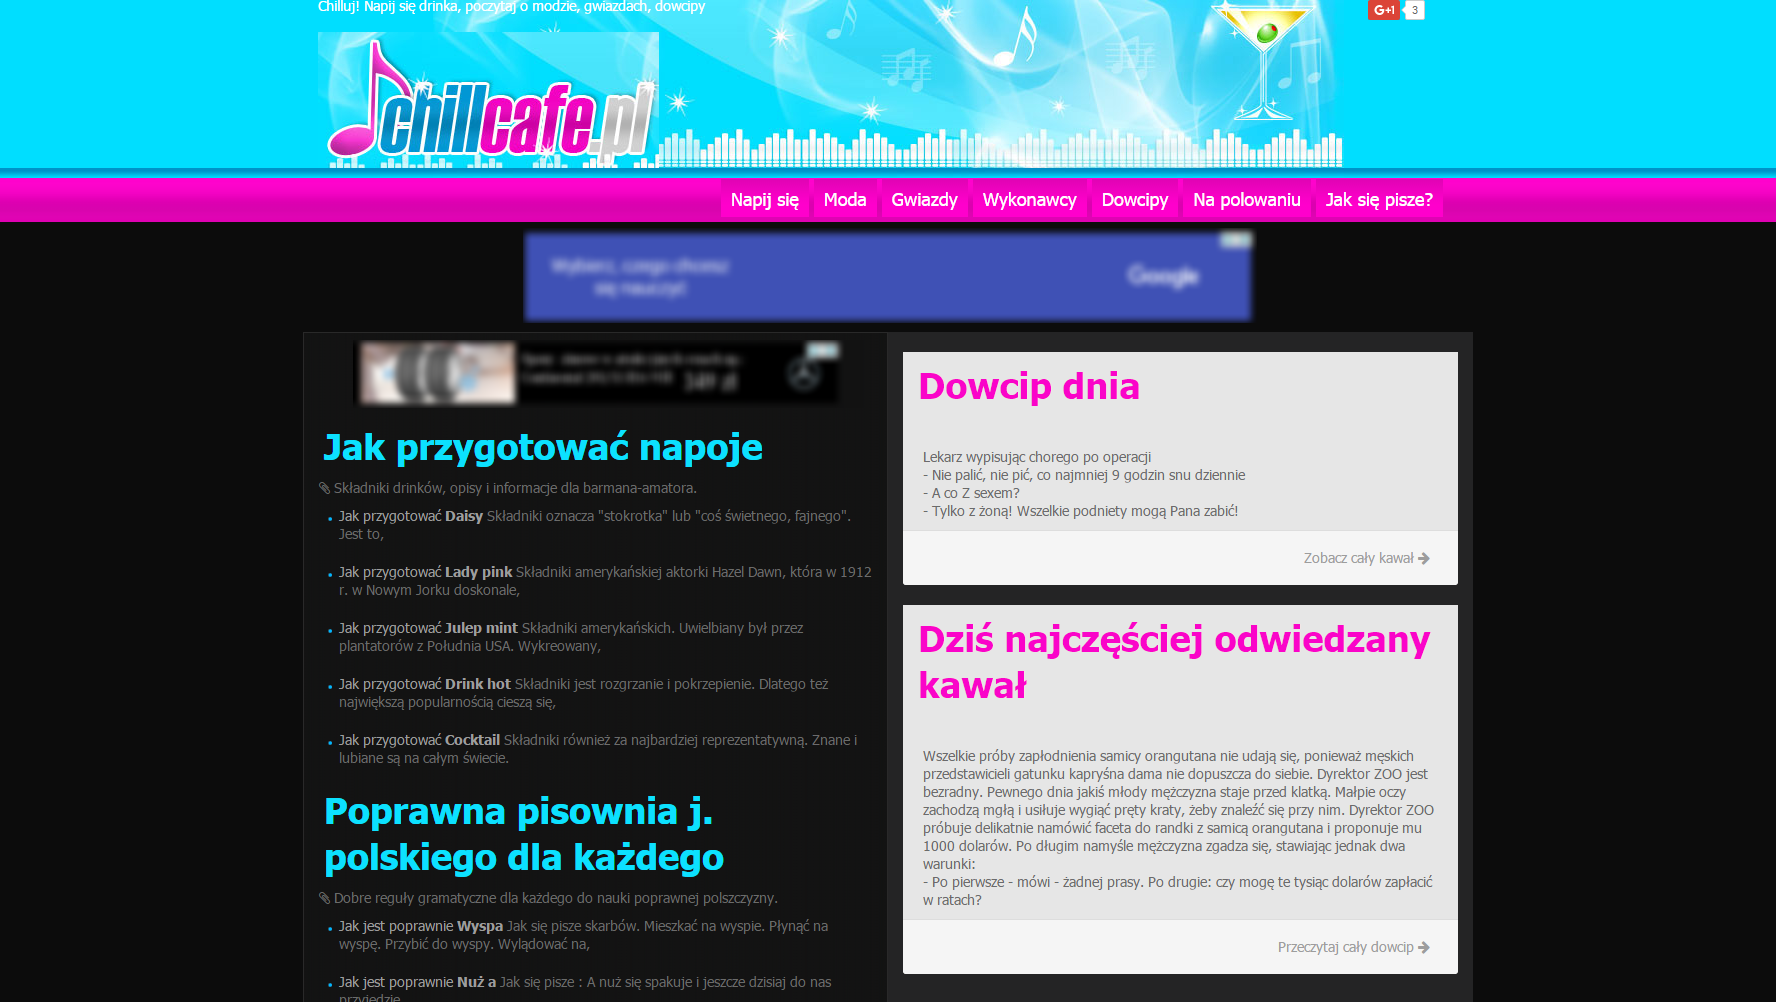 Proyecto ChillCafe.pl